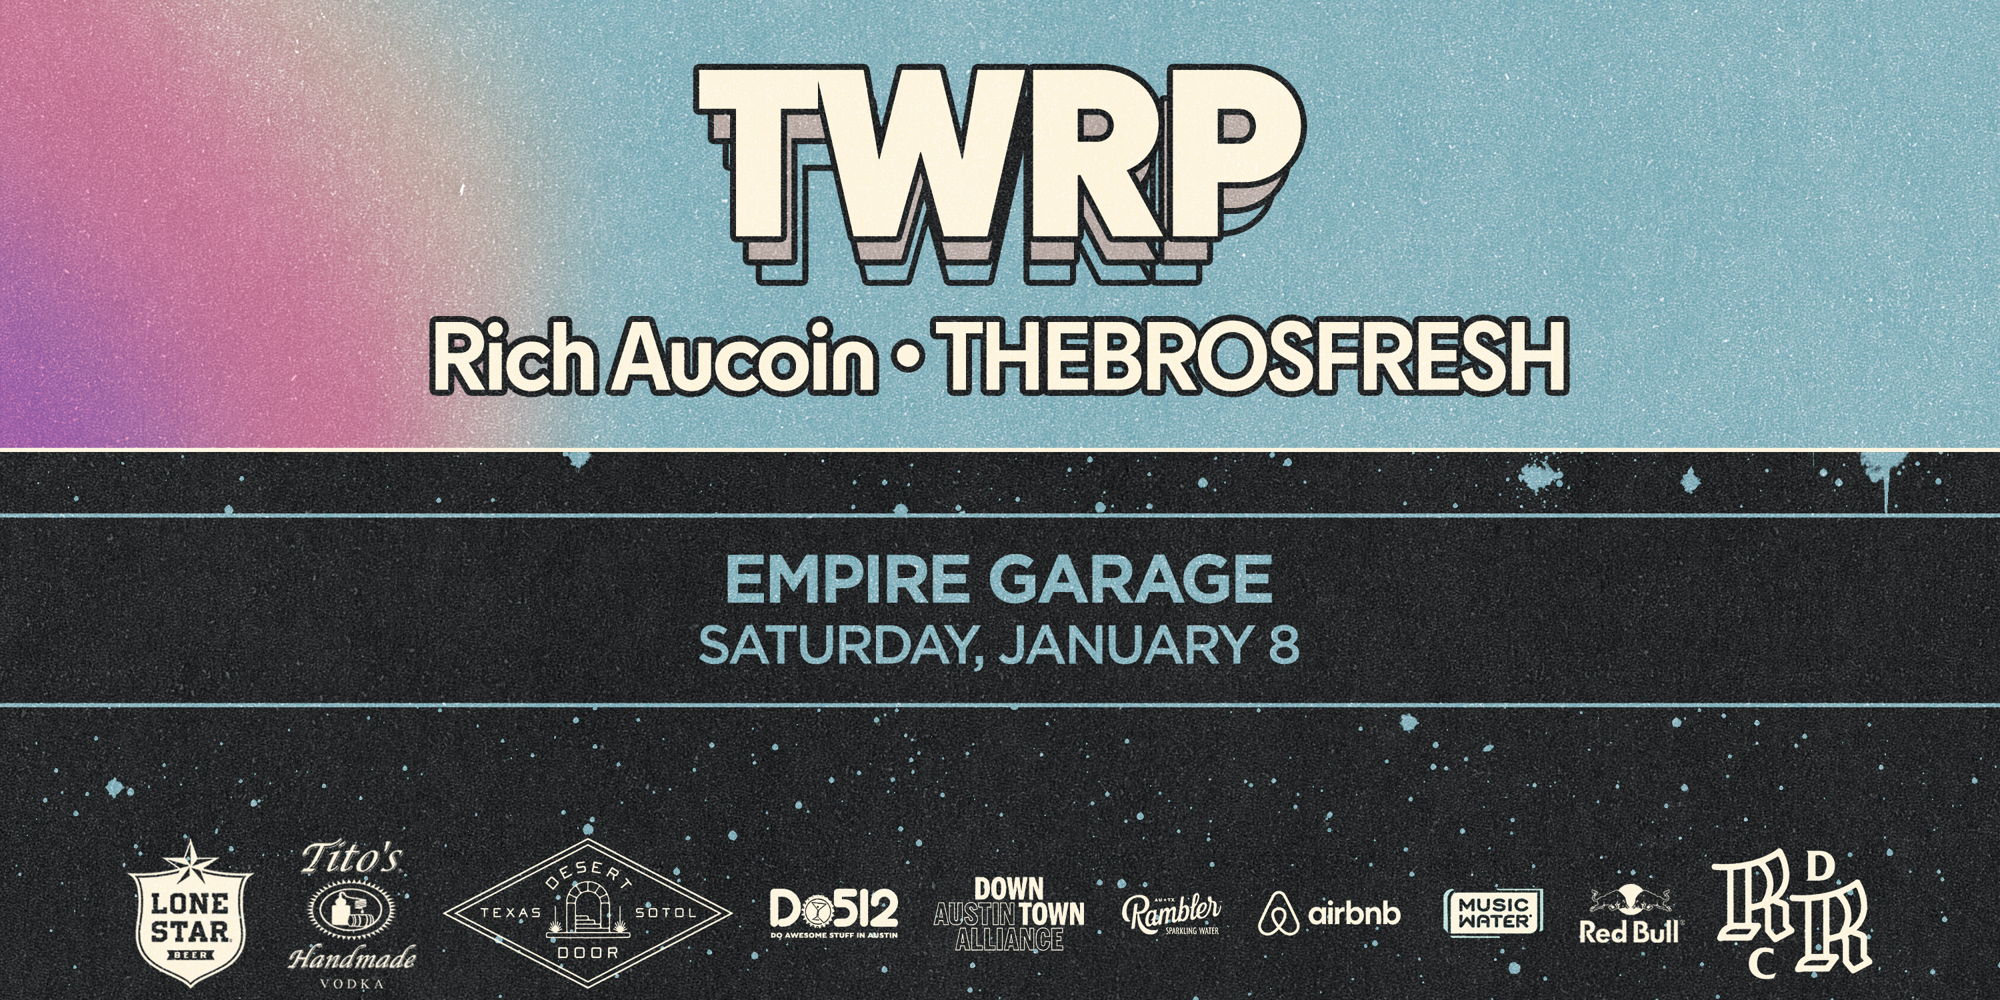 Free Week 2022: TWRP w/ Rich Aucoin and THEBROSFRESH at Empire Garage 1/8 promotional image